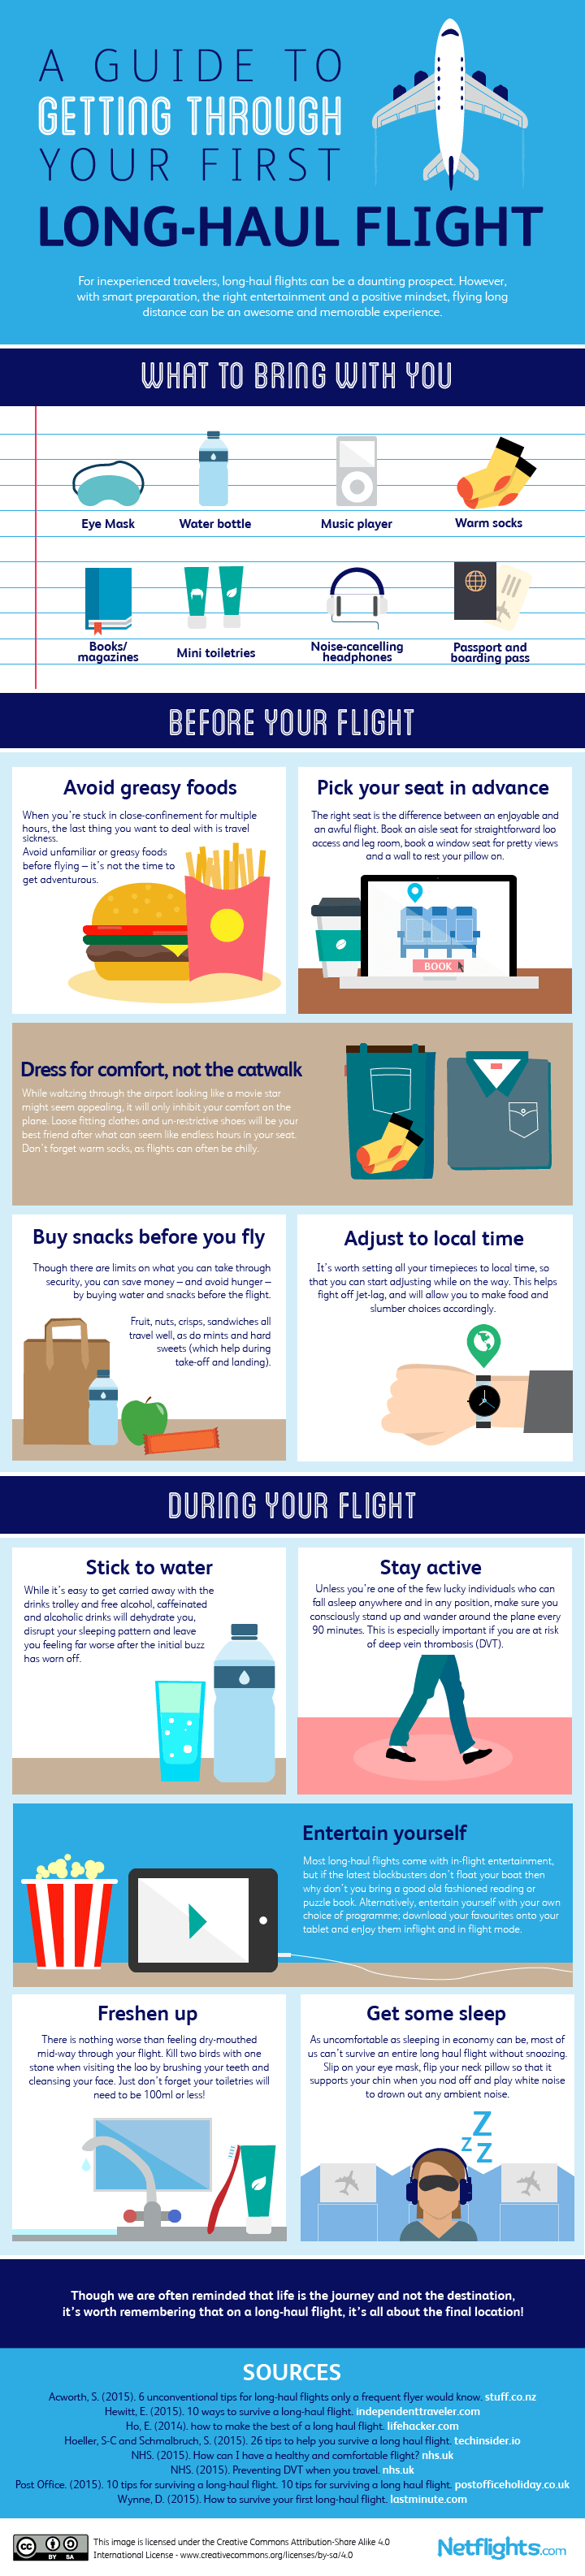 Guide to long-haul flights #infographic